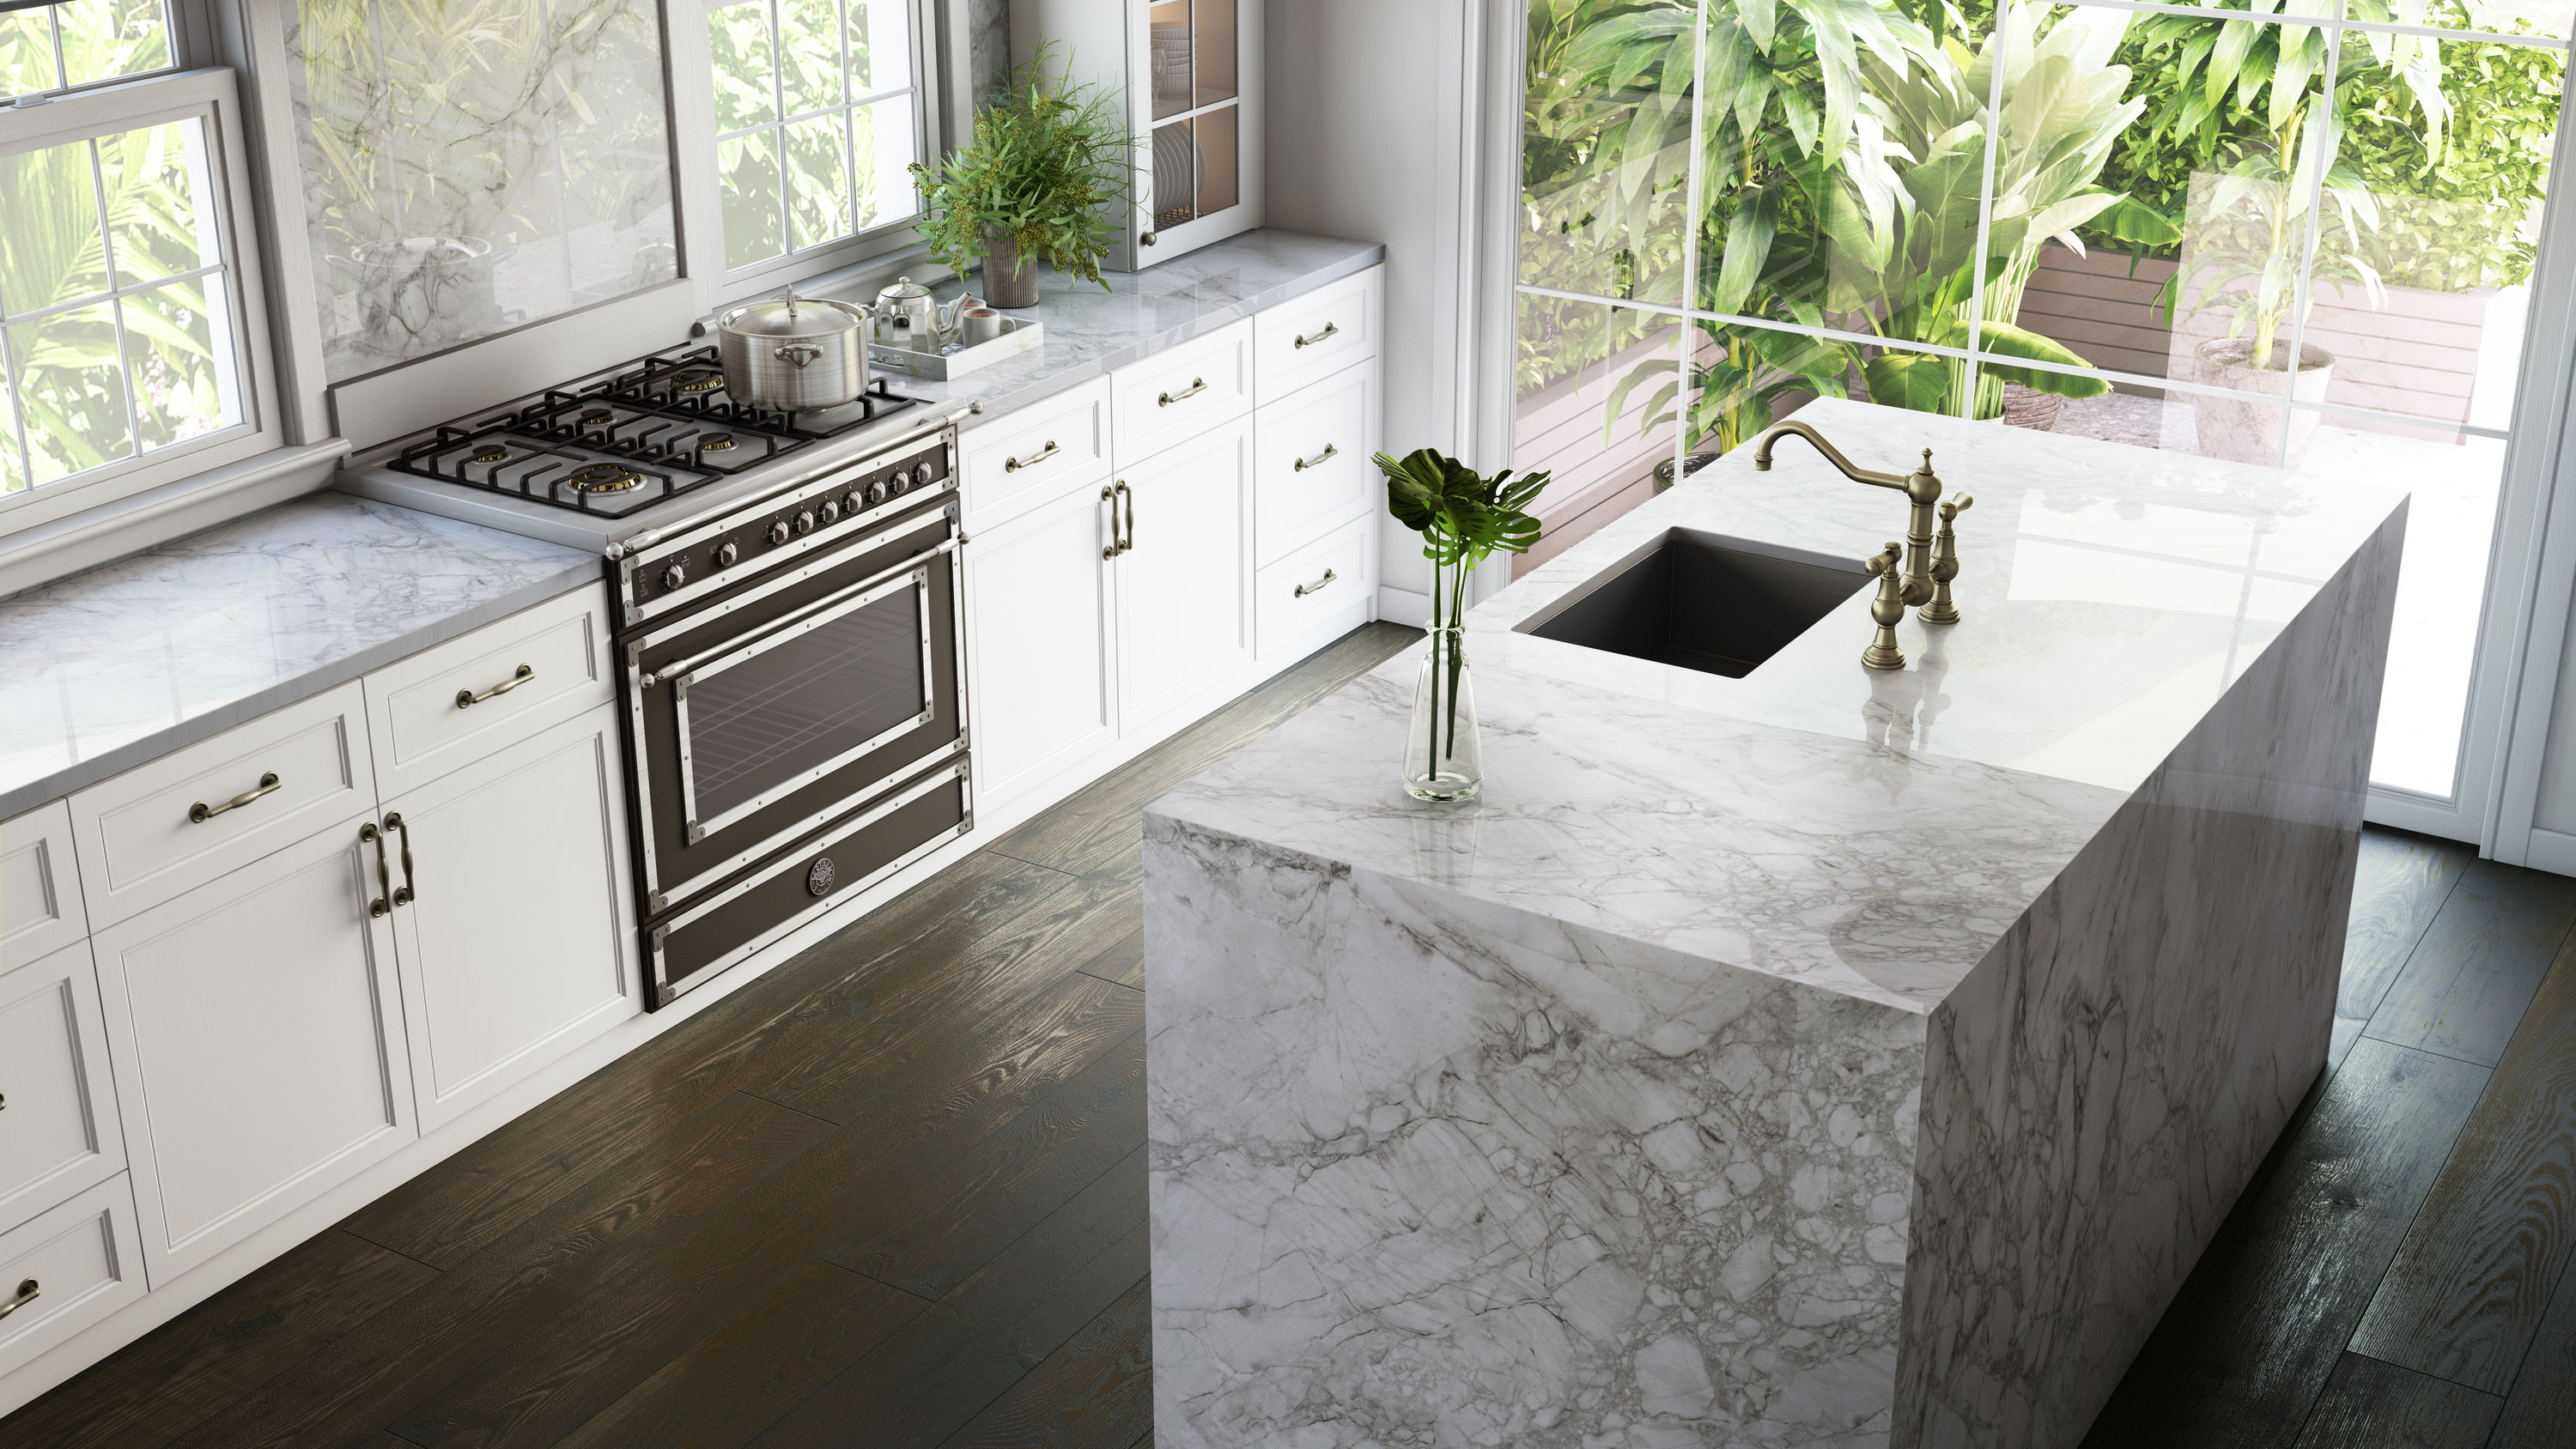 DEKTON Ultracompact In Bergen Ultra Compact Surface Off-white Kitchen SAMPLE (4-in x 6-in) at Lowes.com